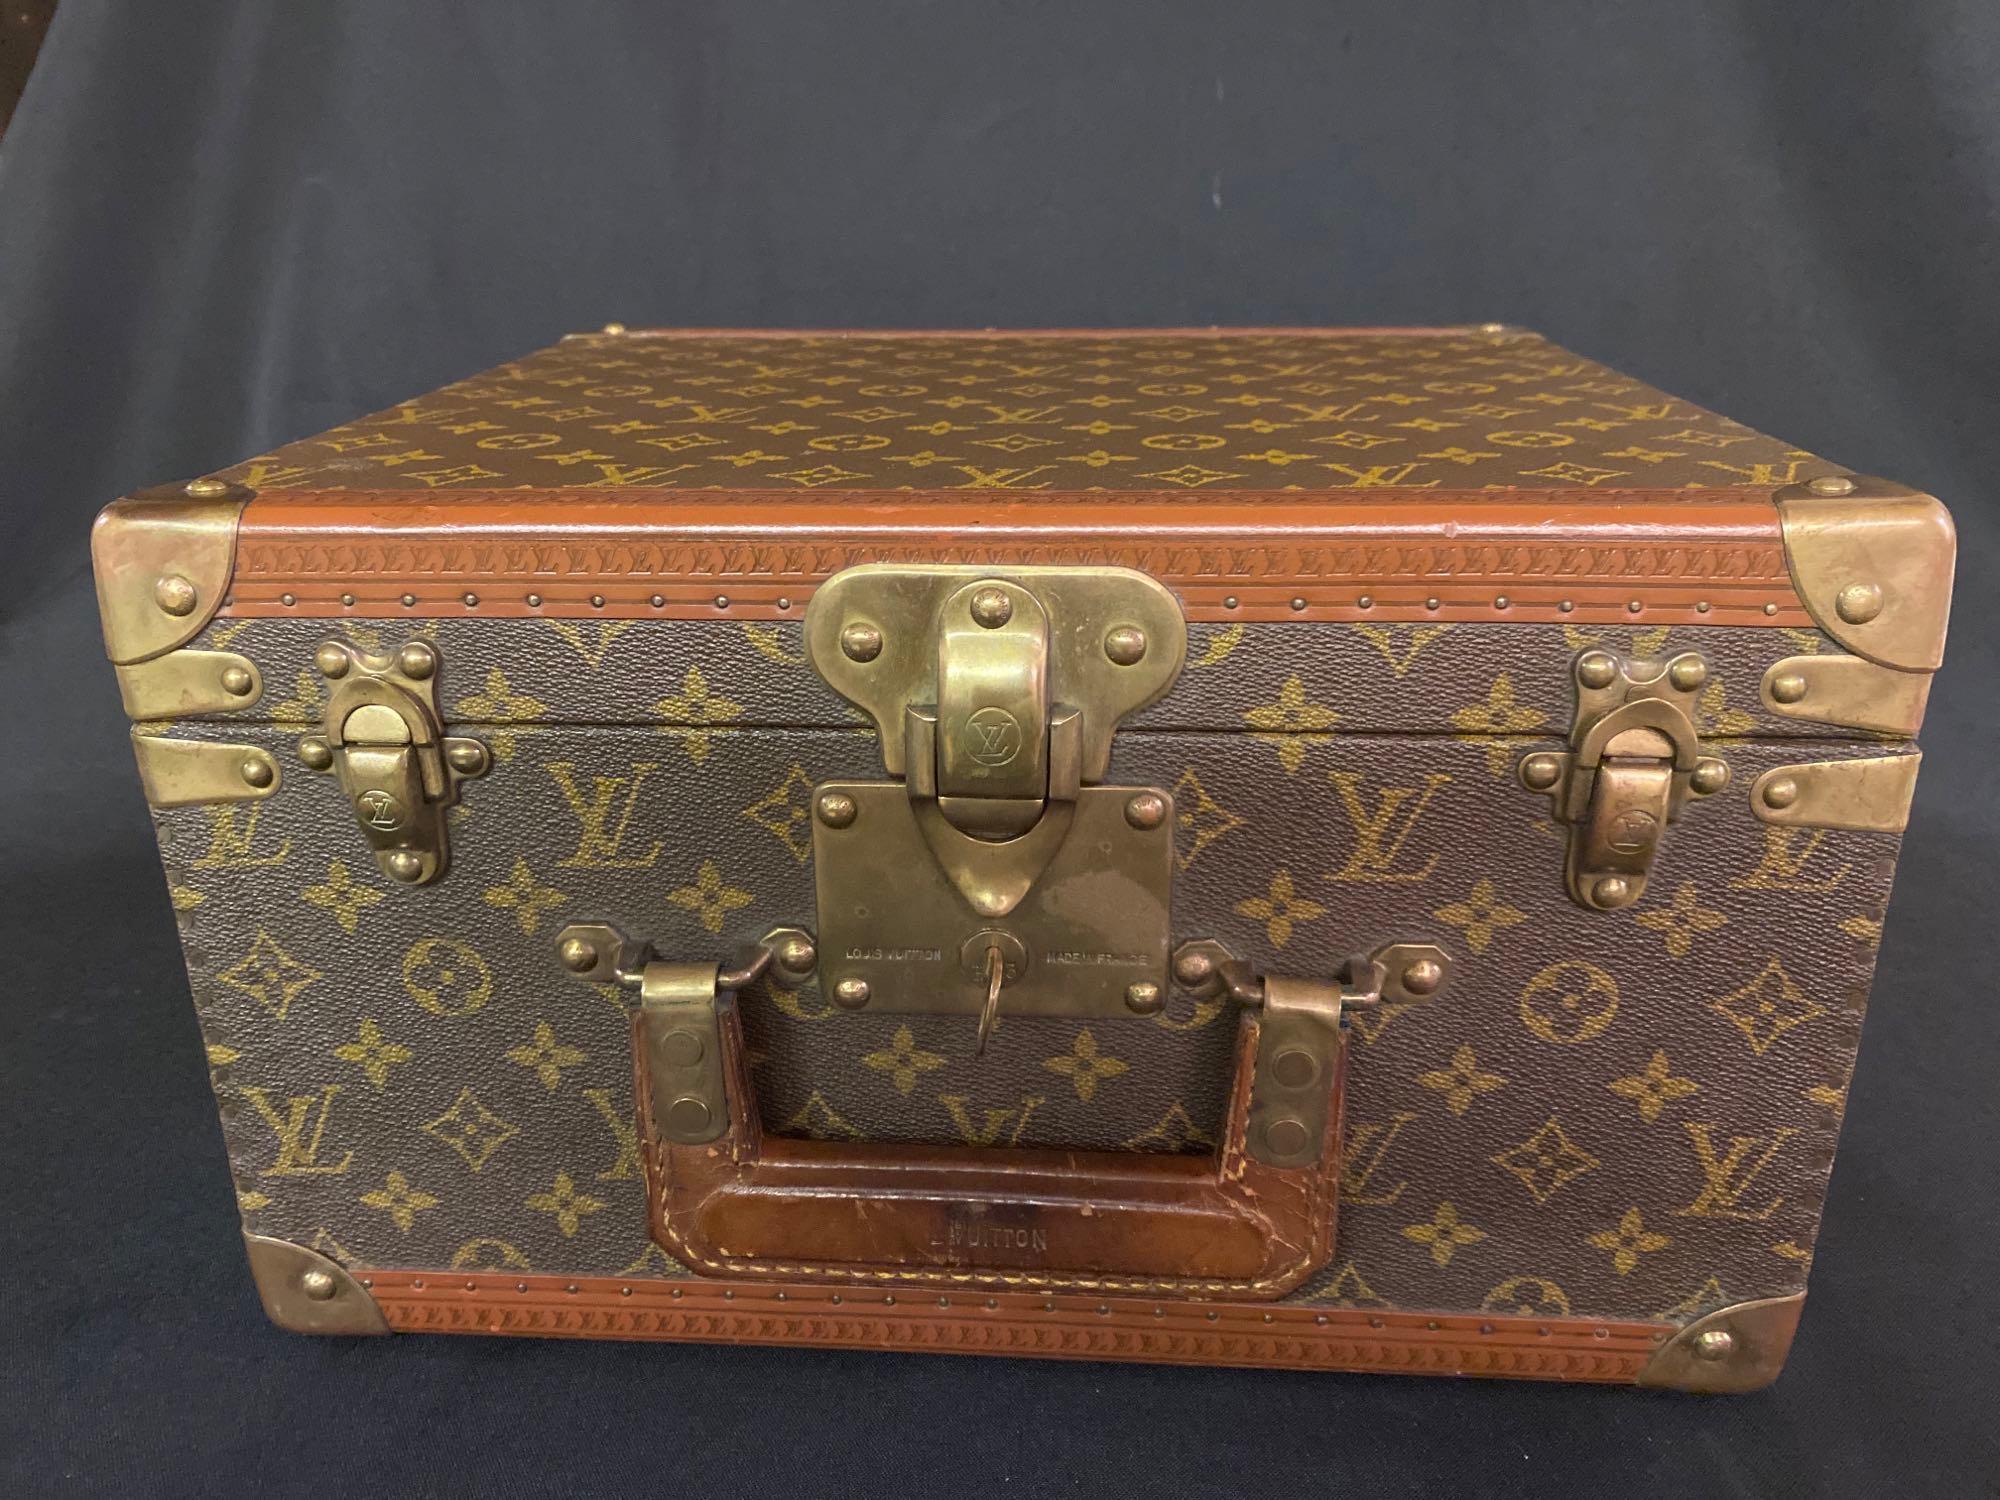 Louis Vuitton travel hat box, made in France. Has